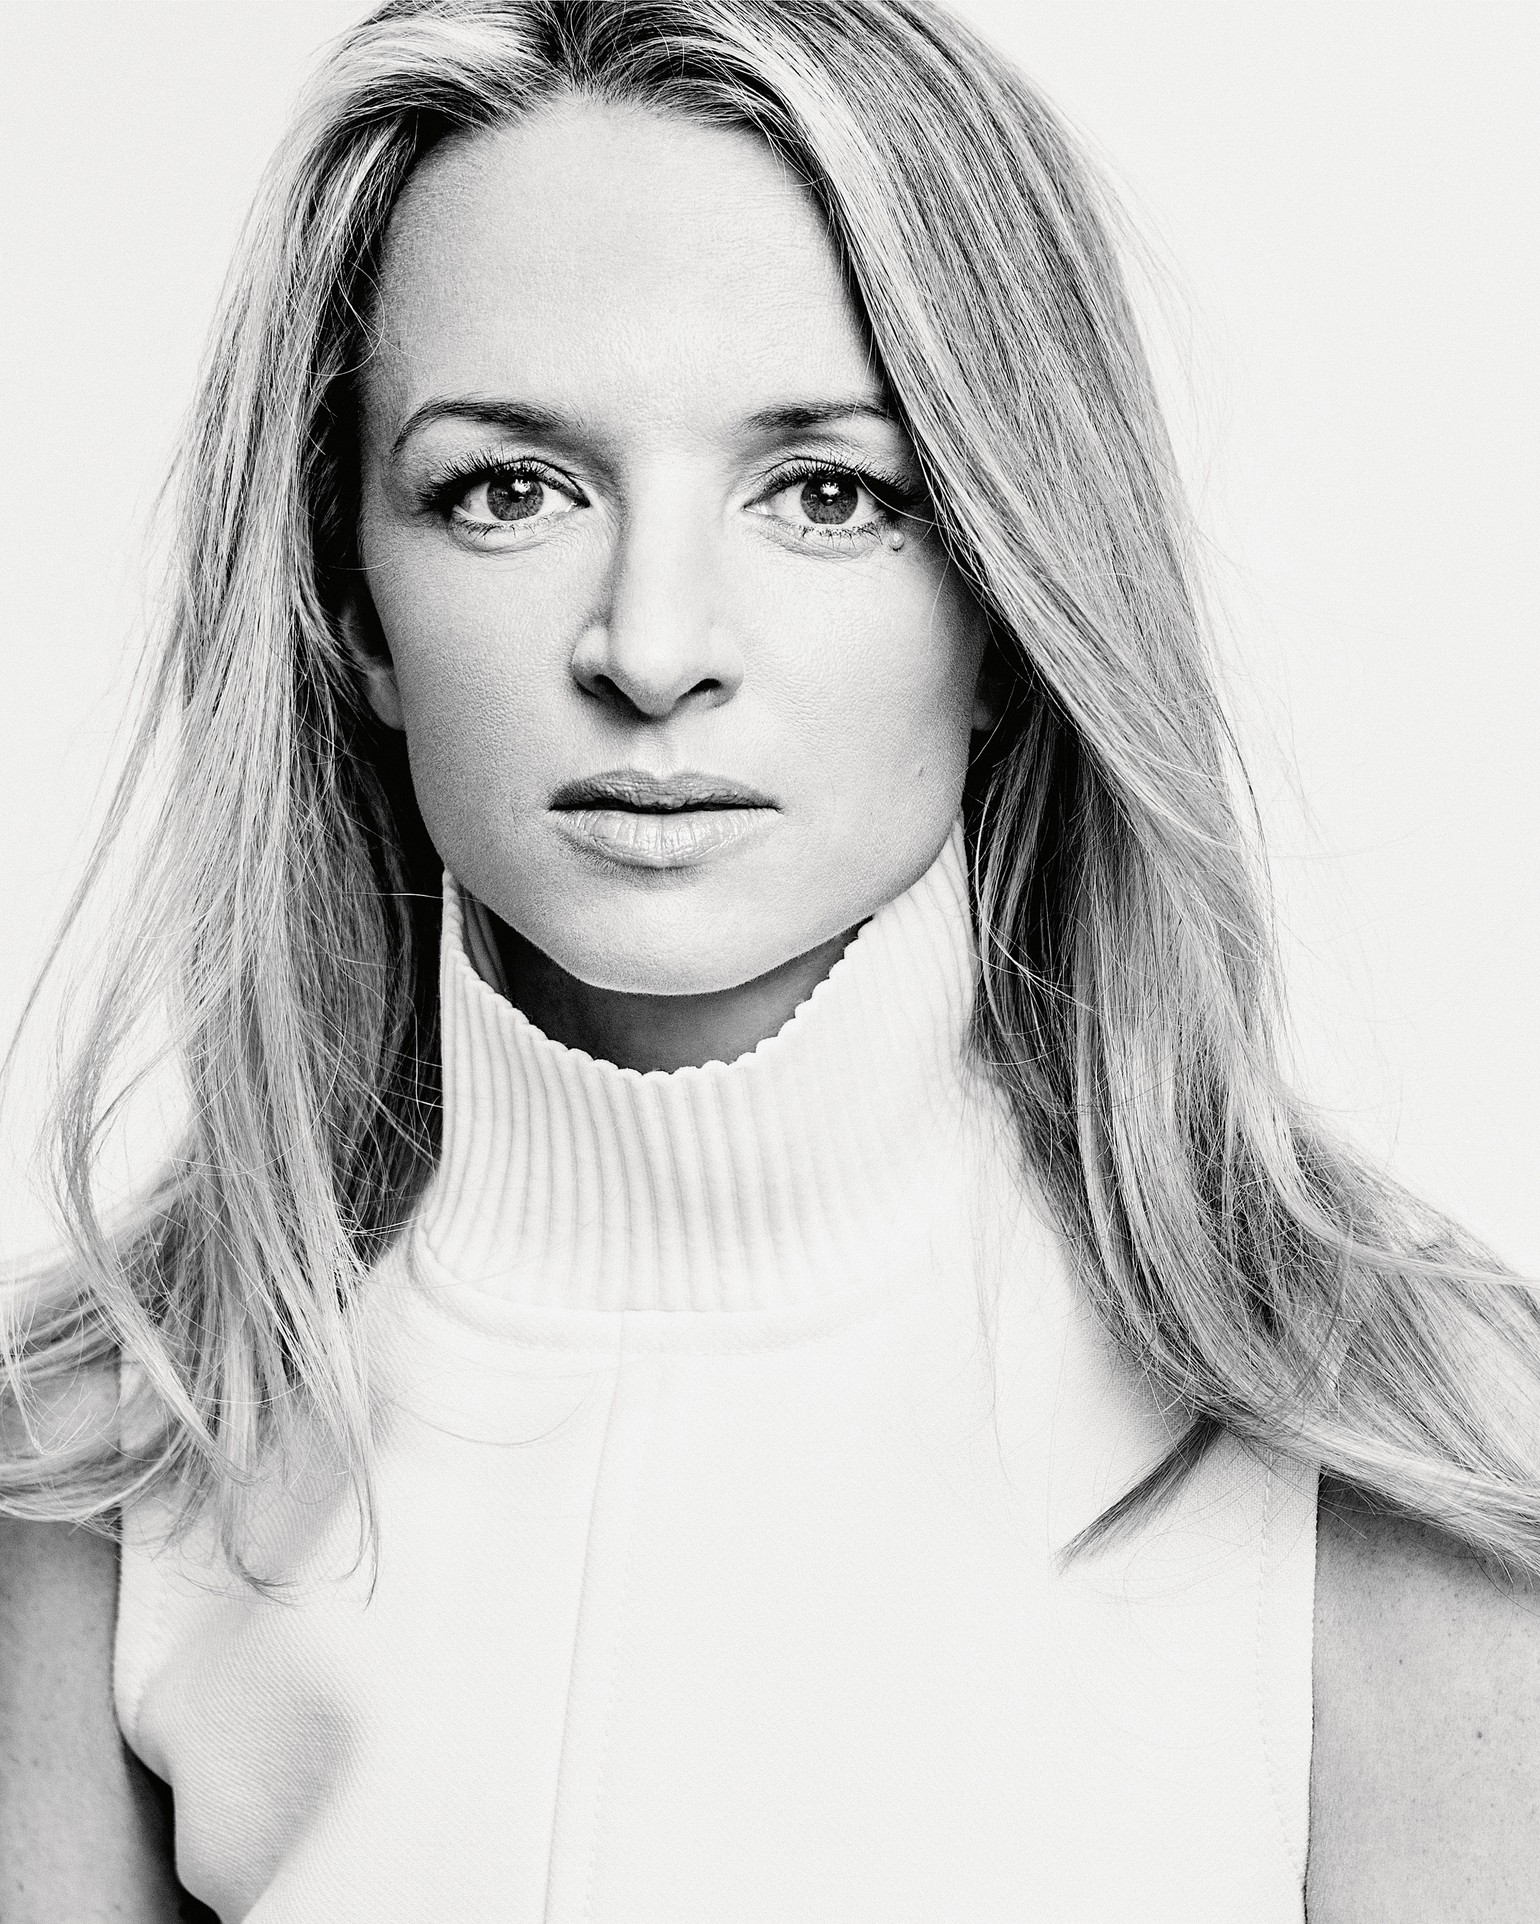 SURFACE - DELPHINE ARNAULT - SEPTEMBER 2015 by Surfacemag - Issuu